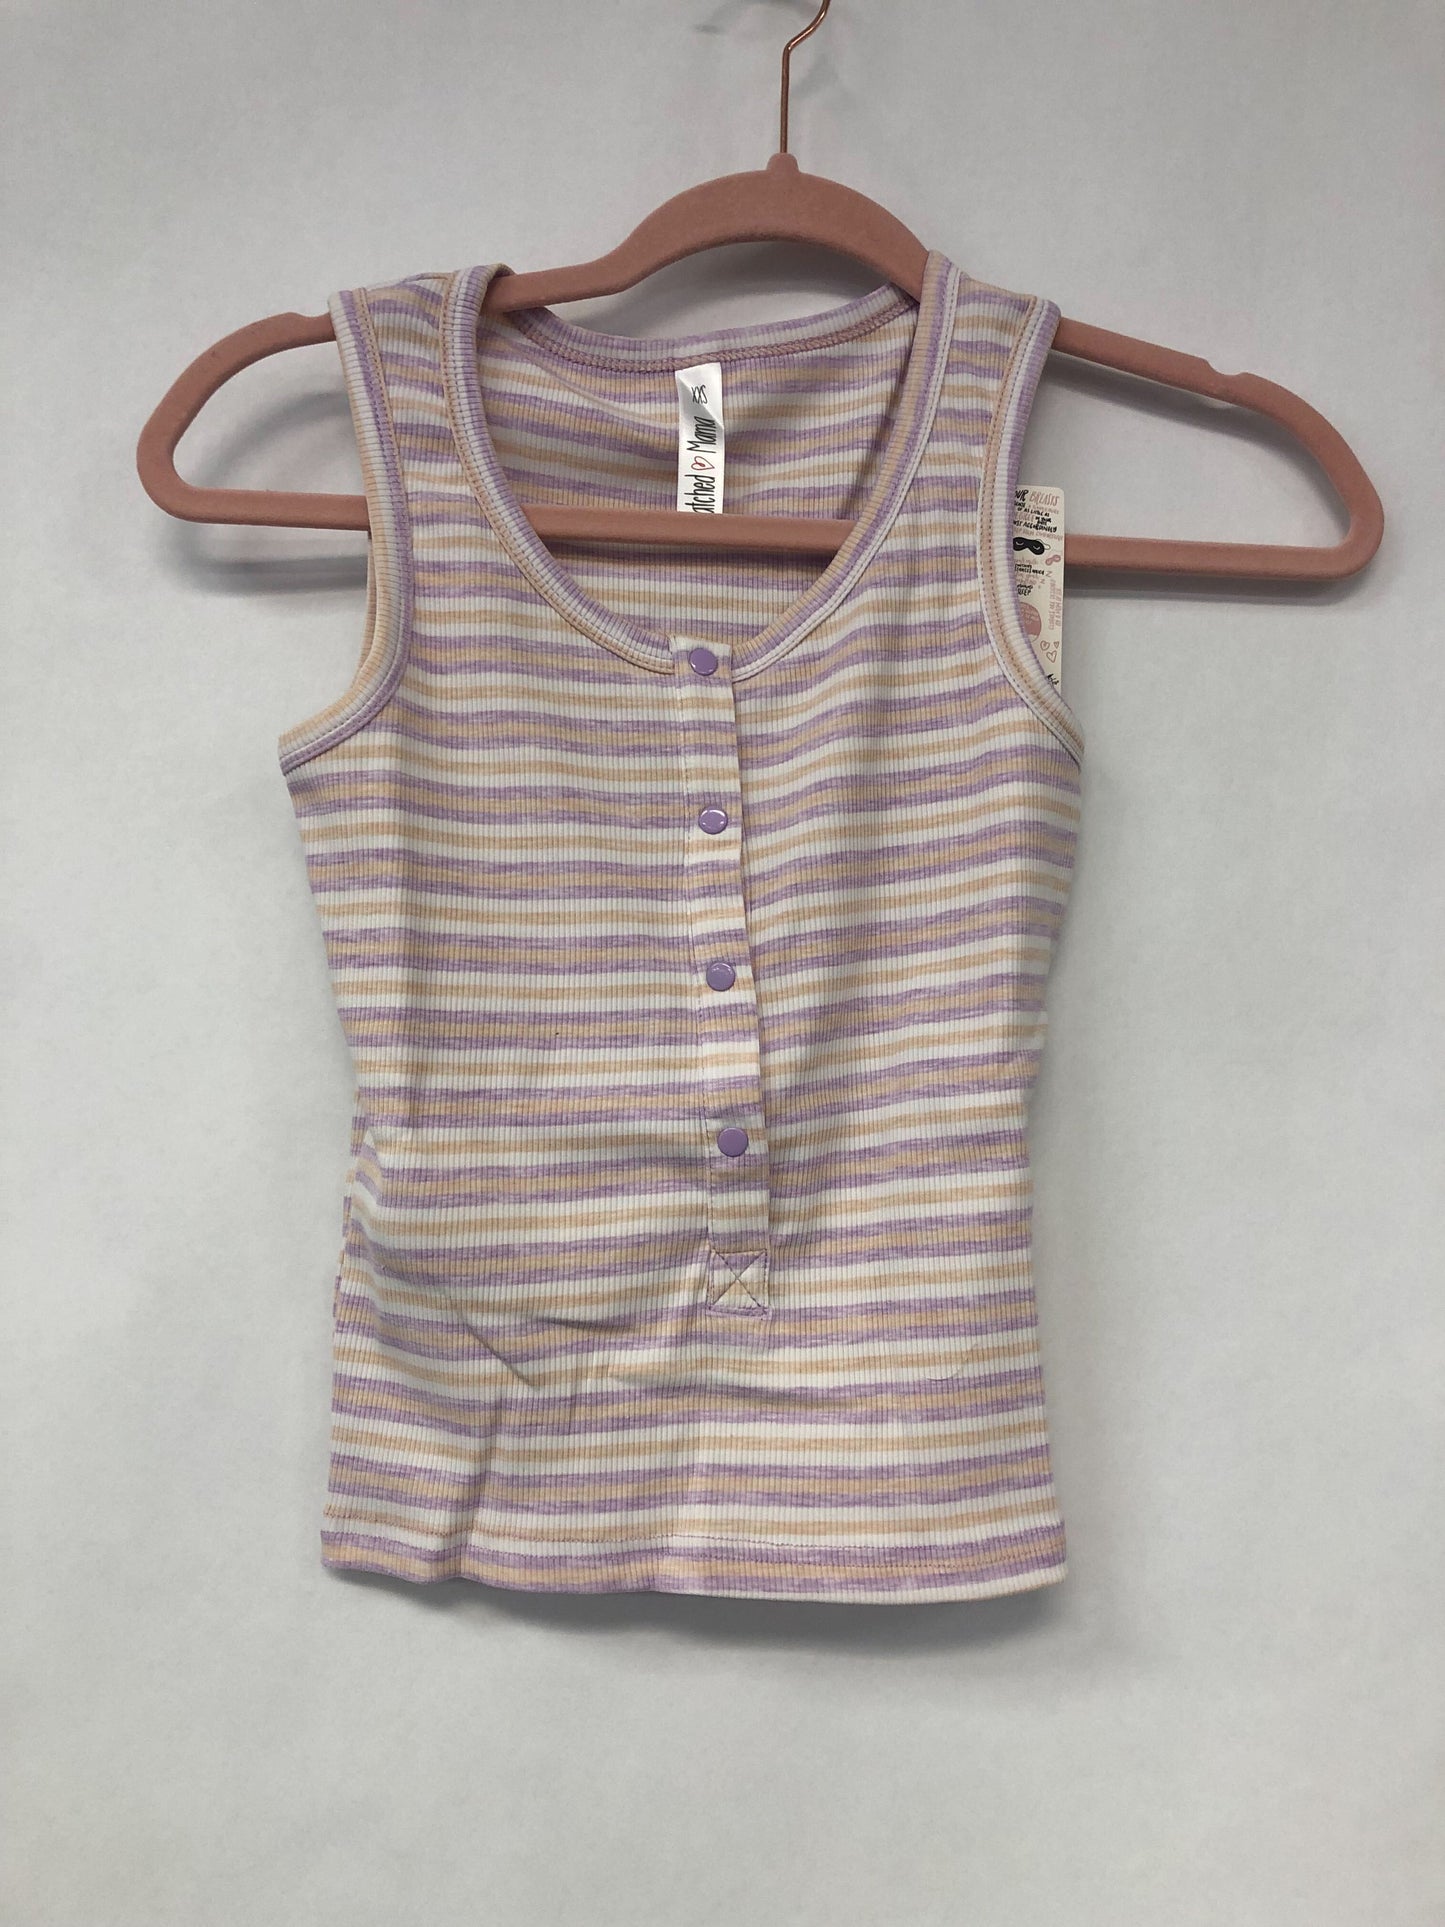 Outlet 6174 - Latched Mama Henley Nursing Crop Top - Lilac/Wheat/Cream - Extra Extra Small